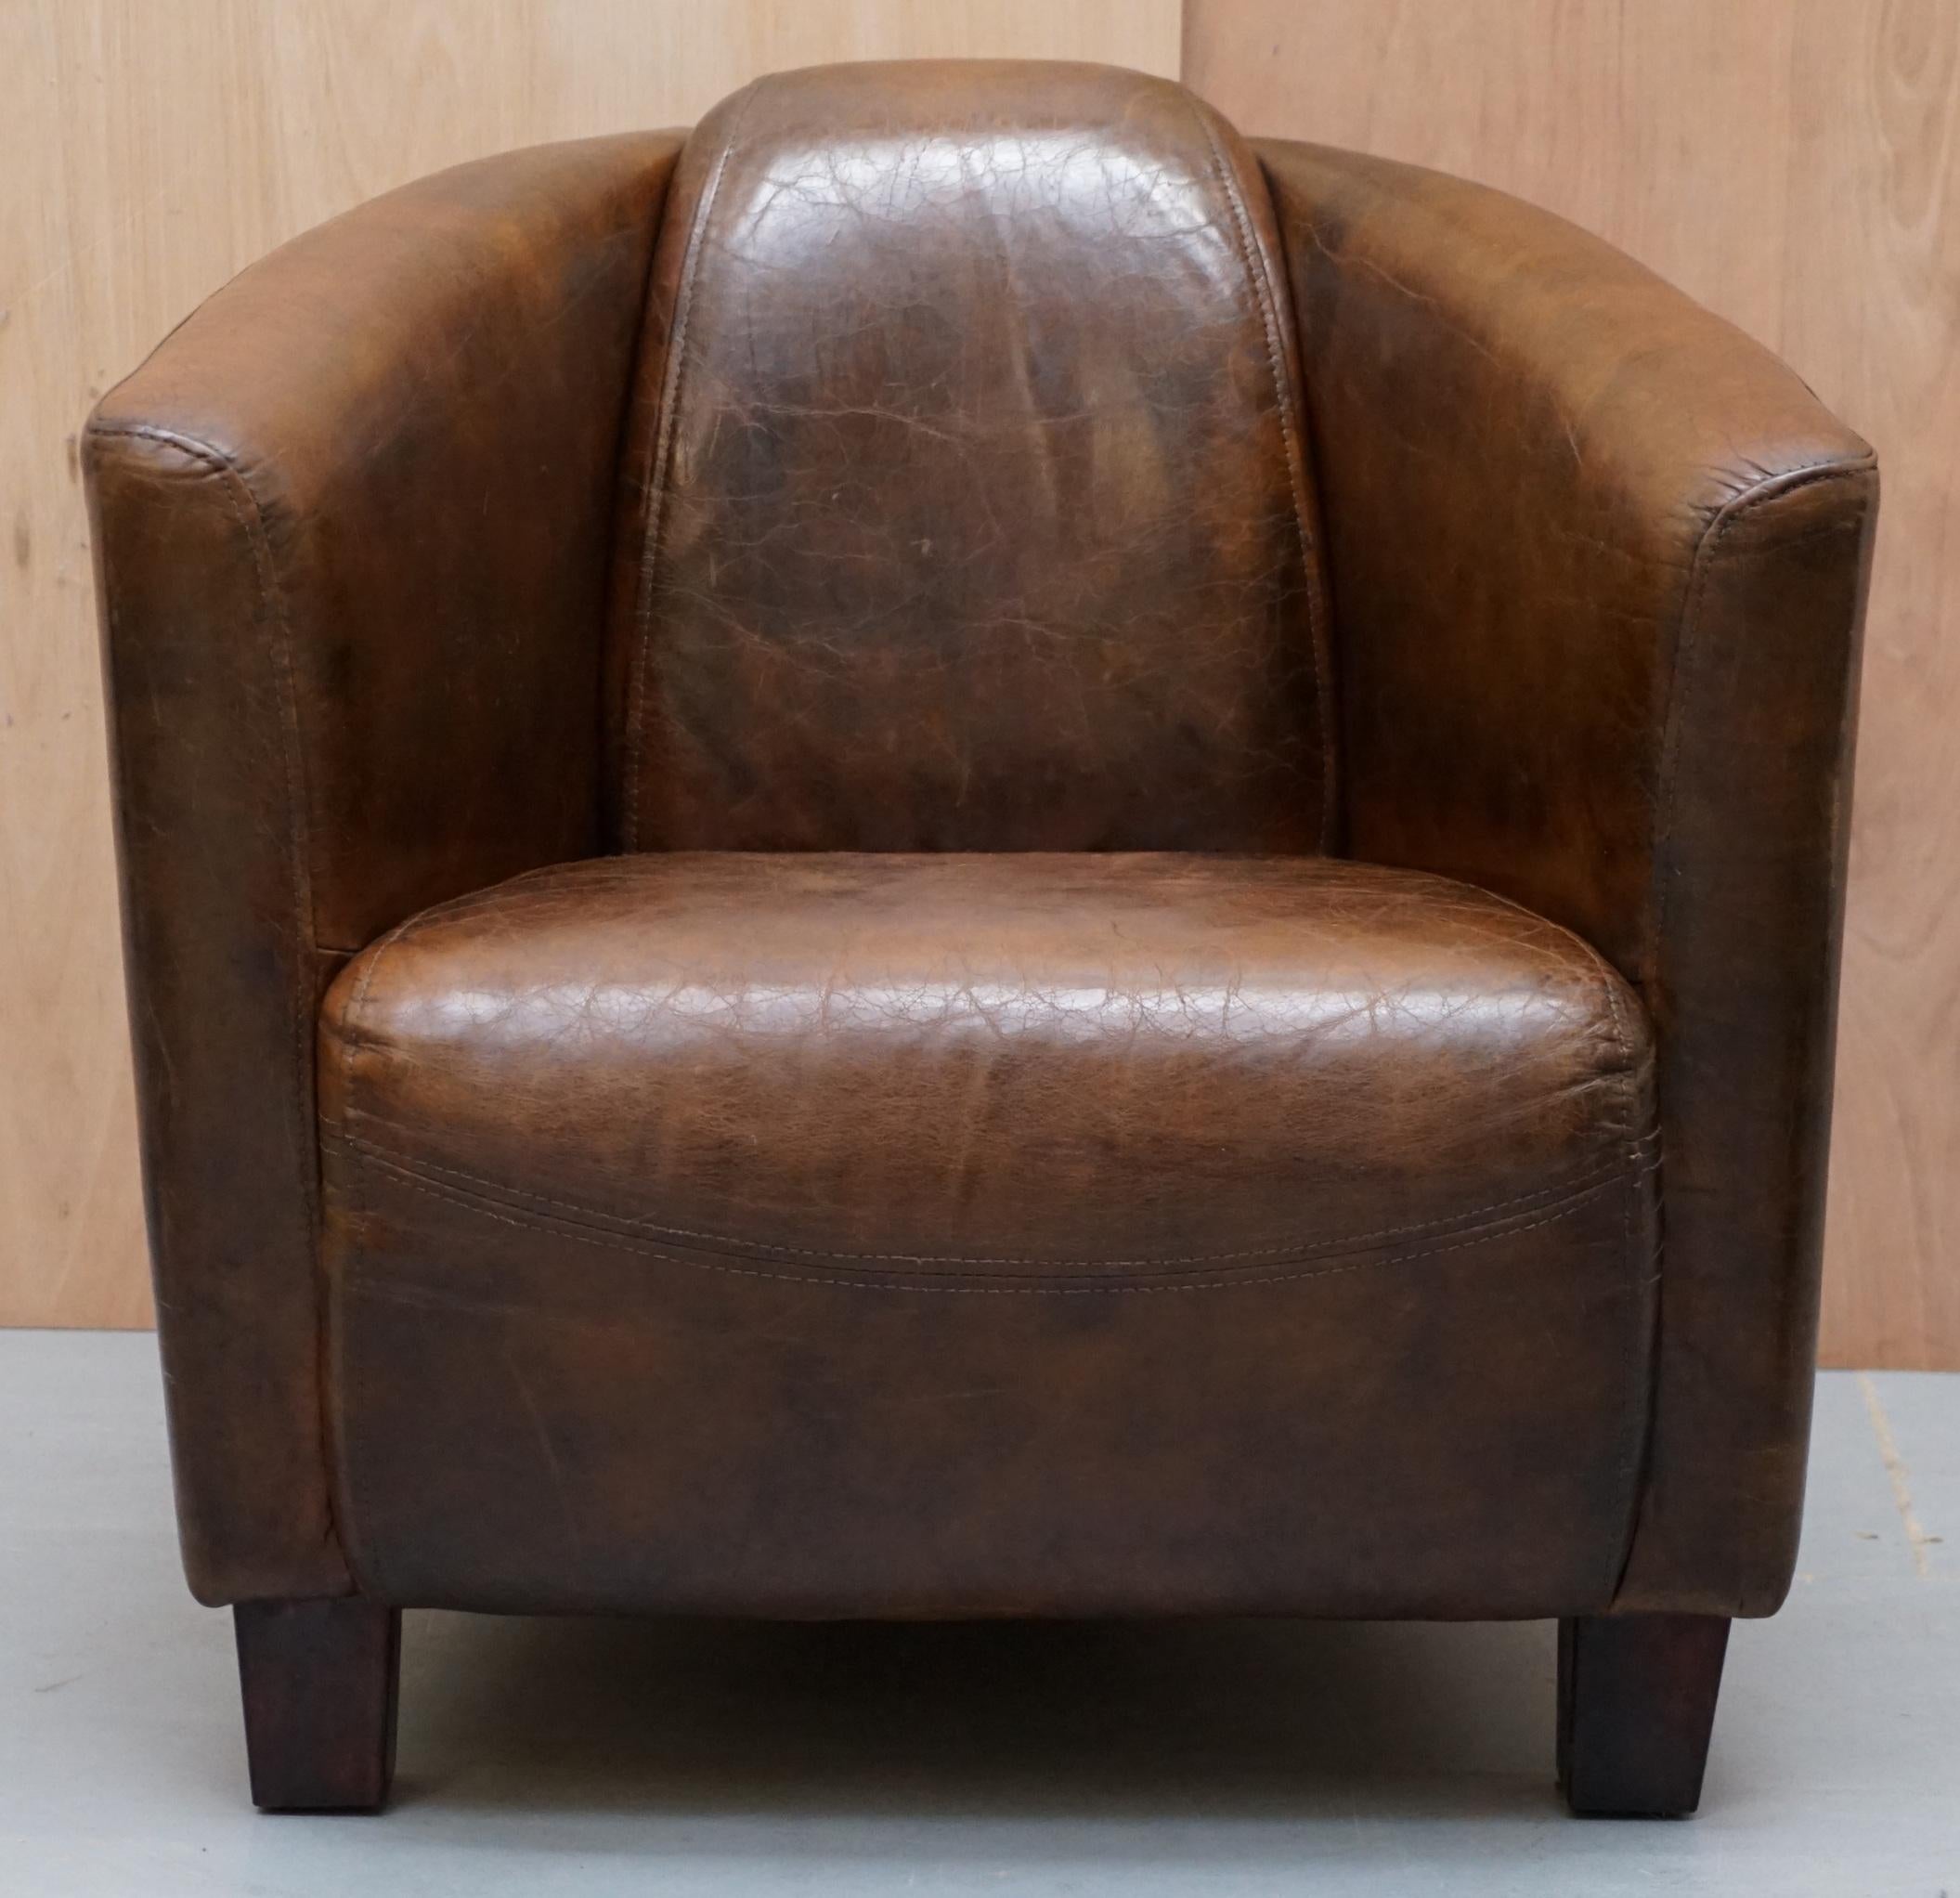 We are delighted to this lovely vintage aged brown leather Halo Rocket small armchair 

A good looking stylish piece, very compact in size so it takes up minimal space

In terms of the condition we have cleaned waxed and polished the chair from